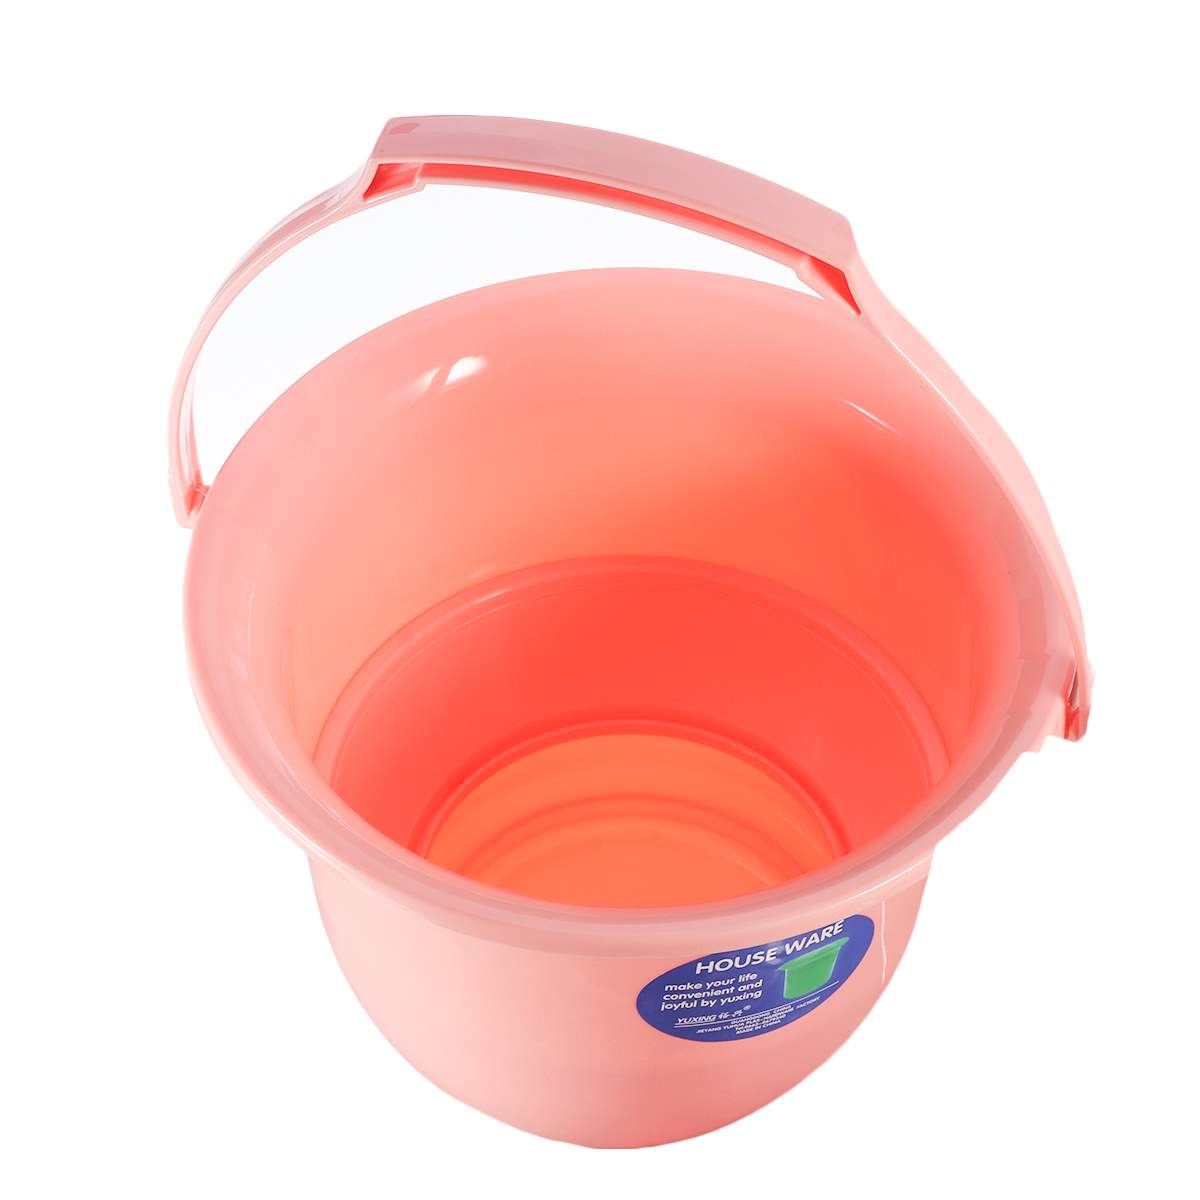 Handheld Potty Training Seat Spittoon Bucket Removable Toilet With Lid Camping Car Travel Portable Urinal Potty Adult Children